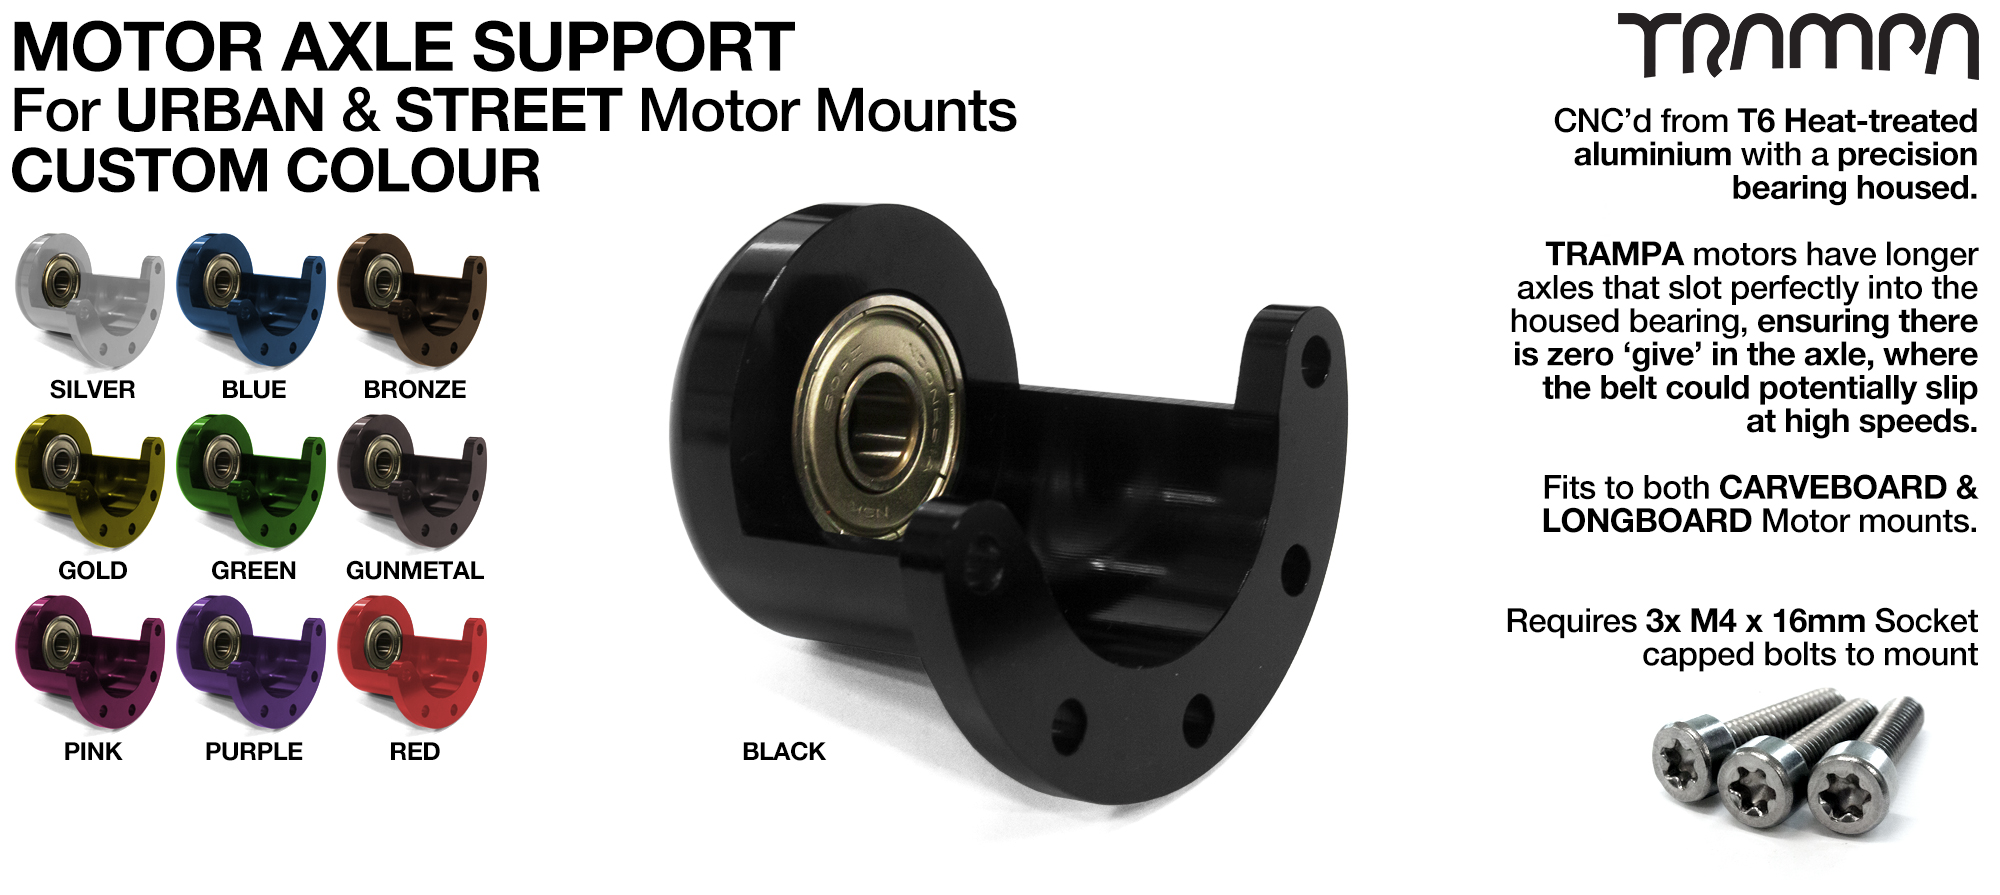 Motor Axle Support for Spring Truck Motor Mounts  UNIVERSAL